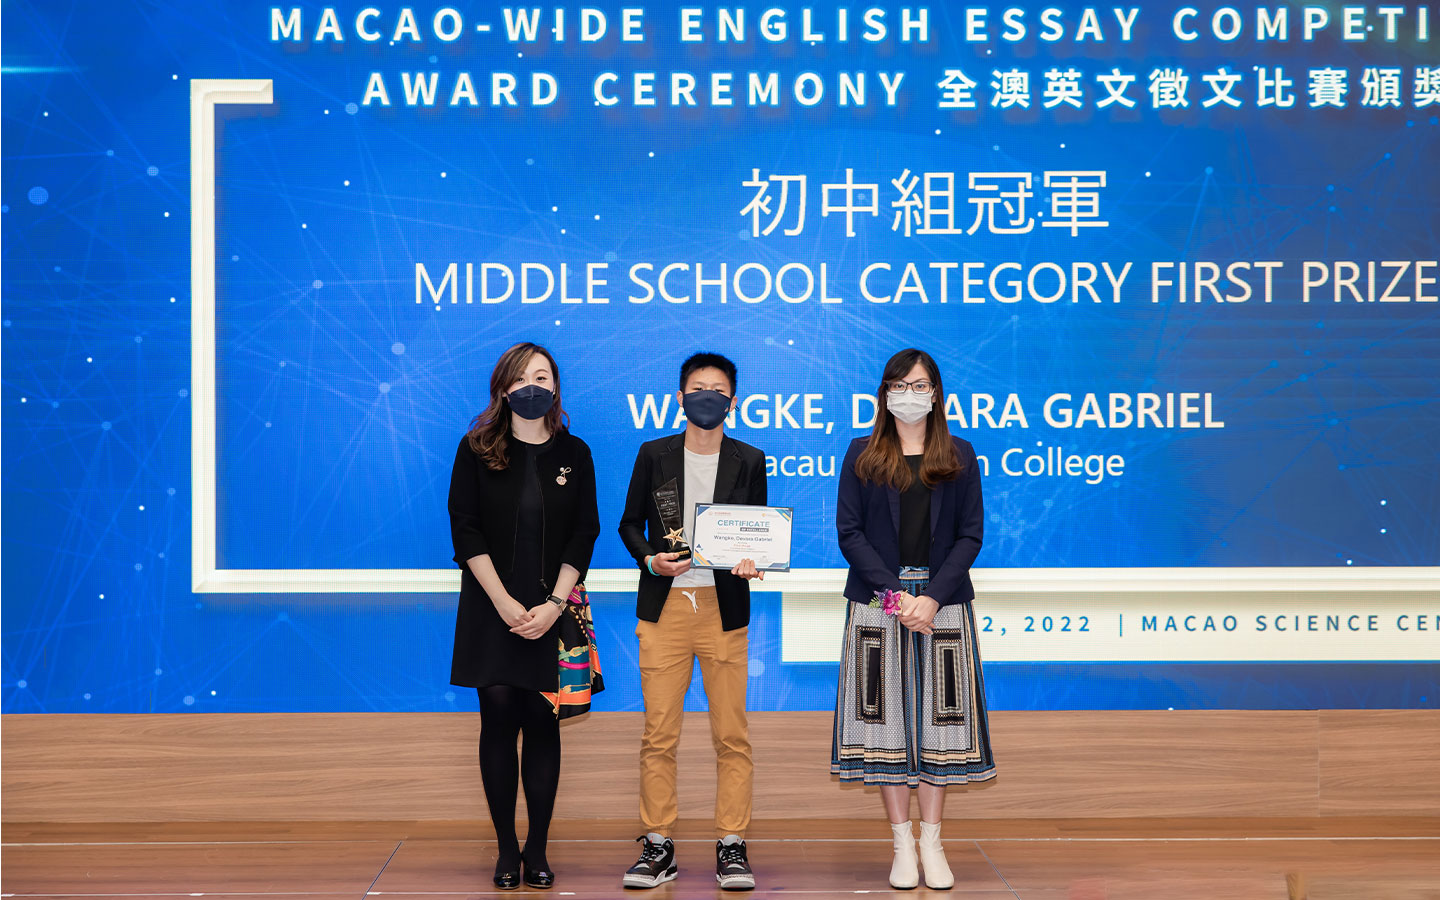 MPSA executive vice president and MEEC organising committee chair Sandy Leong (left), Devara Gabriel Wangke and Education and Youth Development Bureau’s Youth Development Division Chief Tam Sio Wa (right) pose for a photo at the inaugural MEEC’s award ceremony in March last year